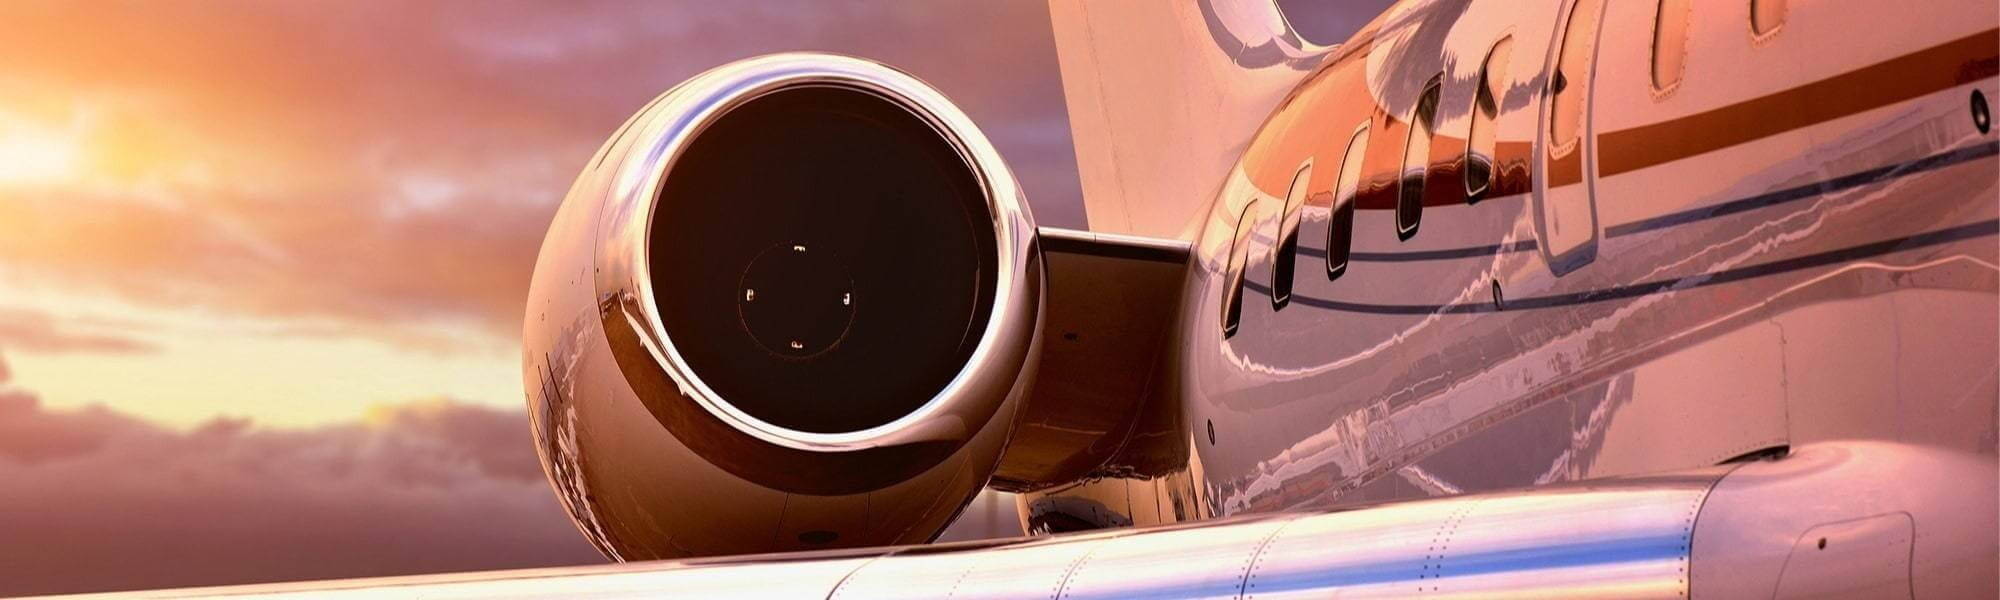 business jet in aviation